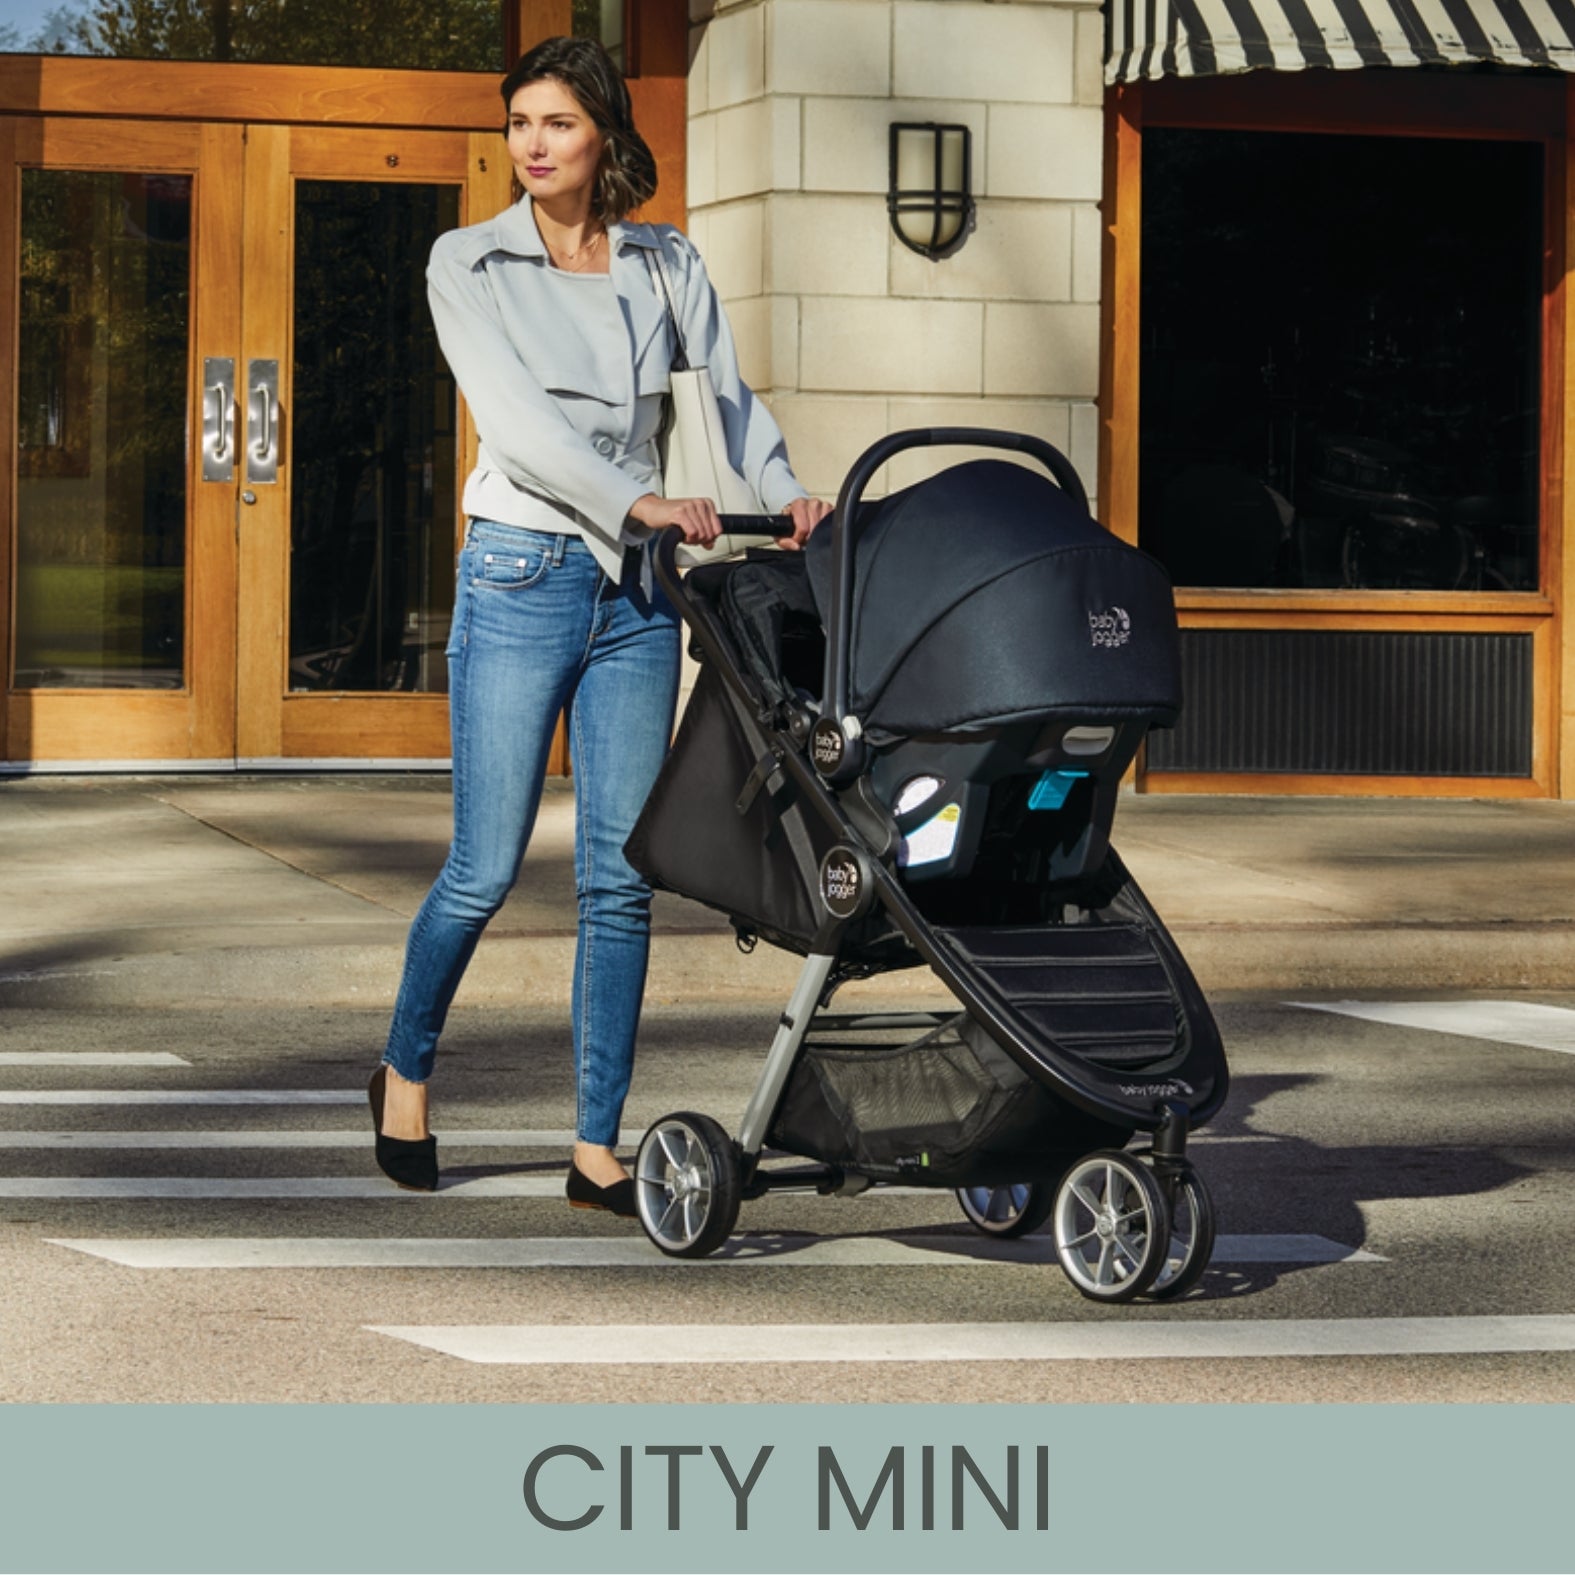 Car seats compatible with Baby Jogger City Mini Stroller